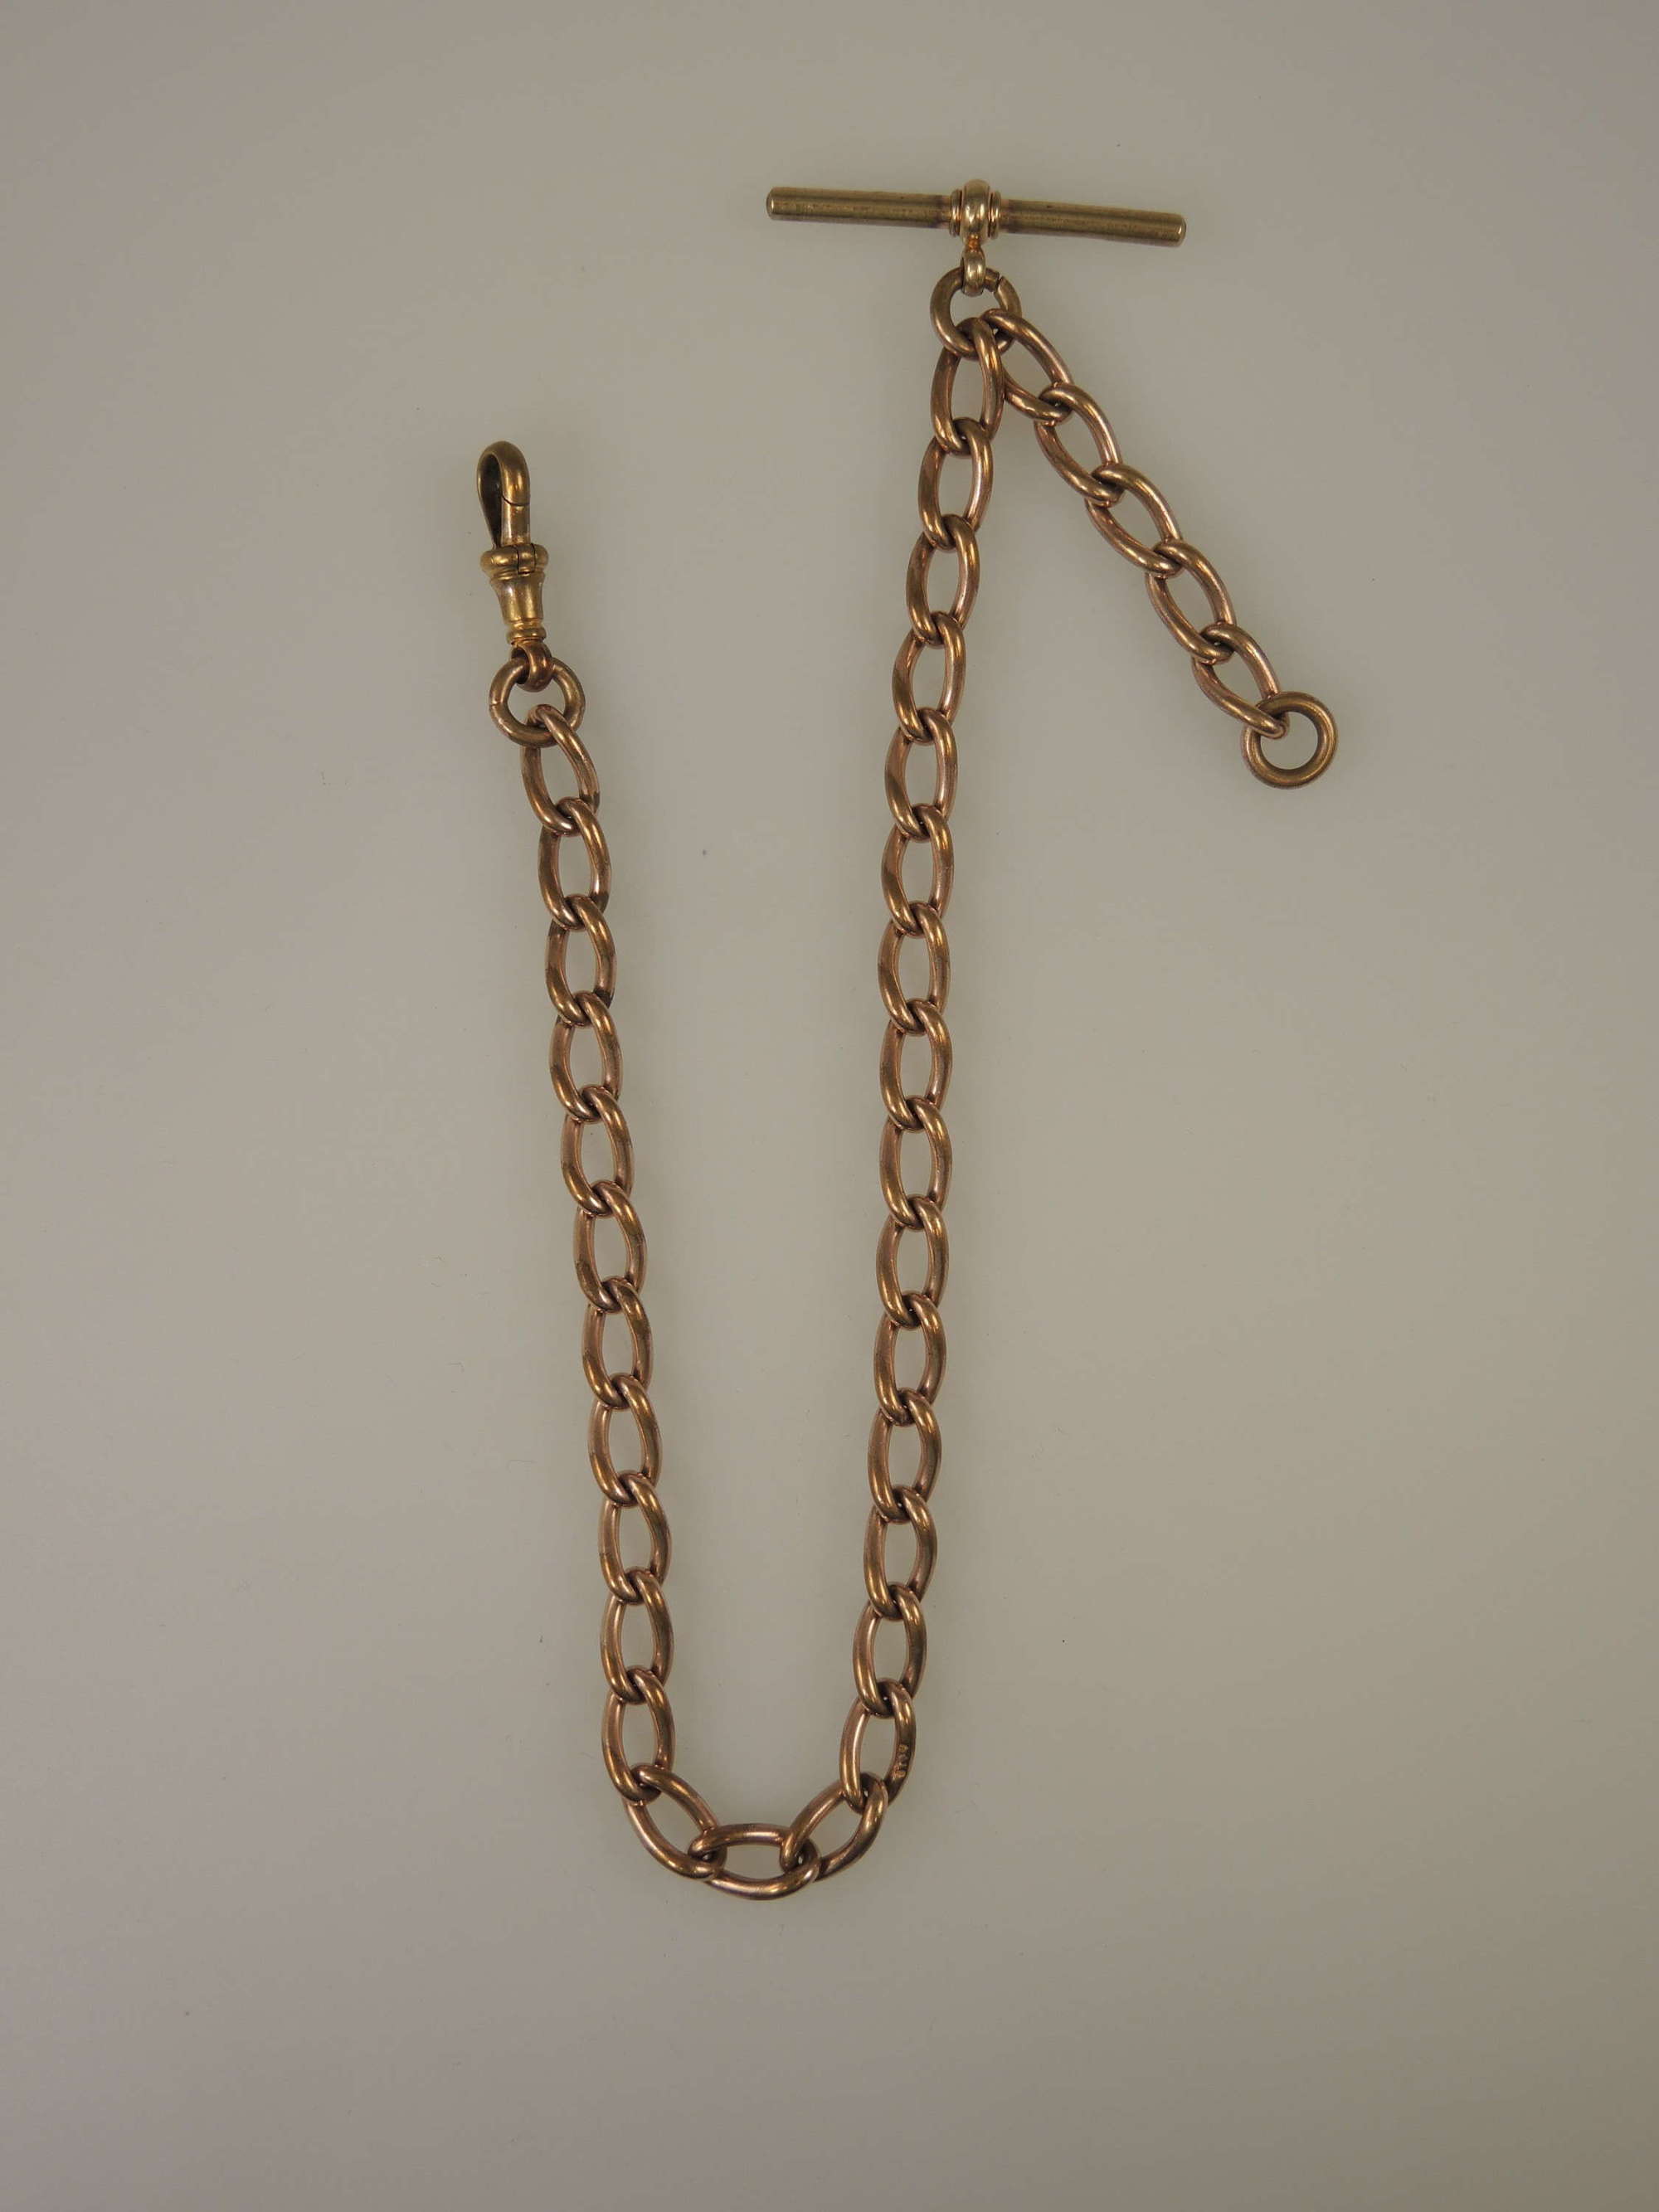 Good vintage gold plated watch chain c1900